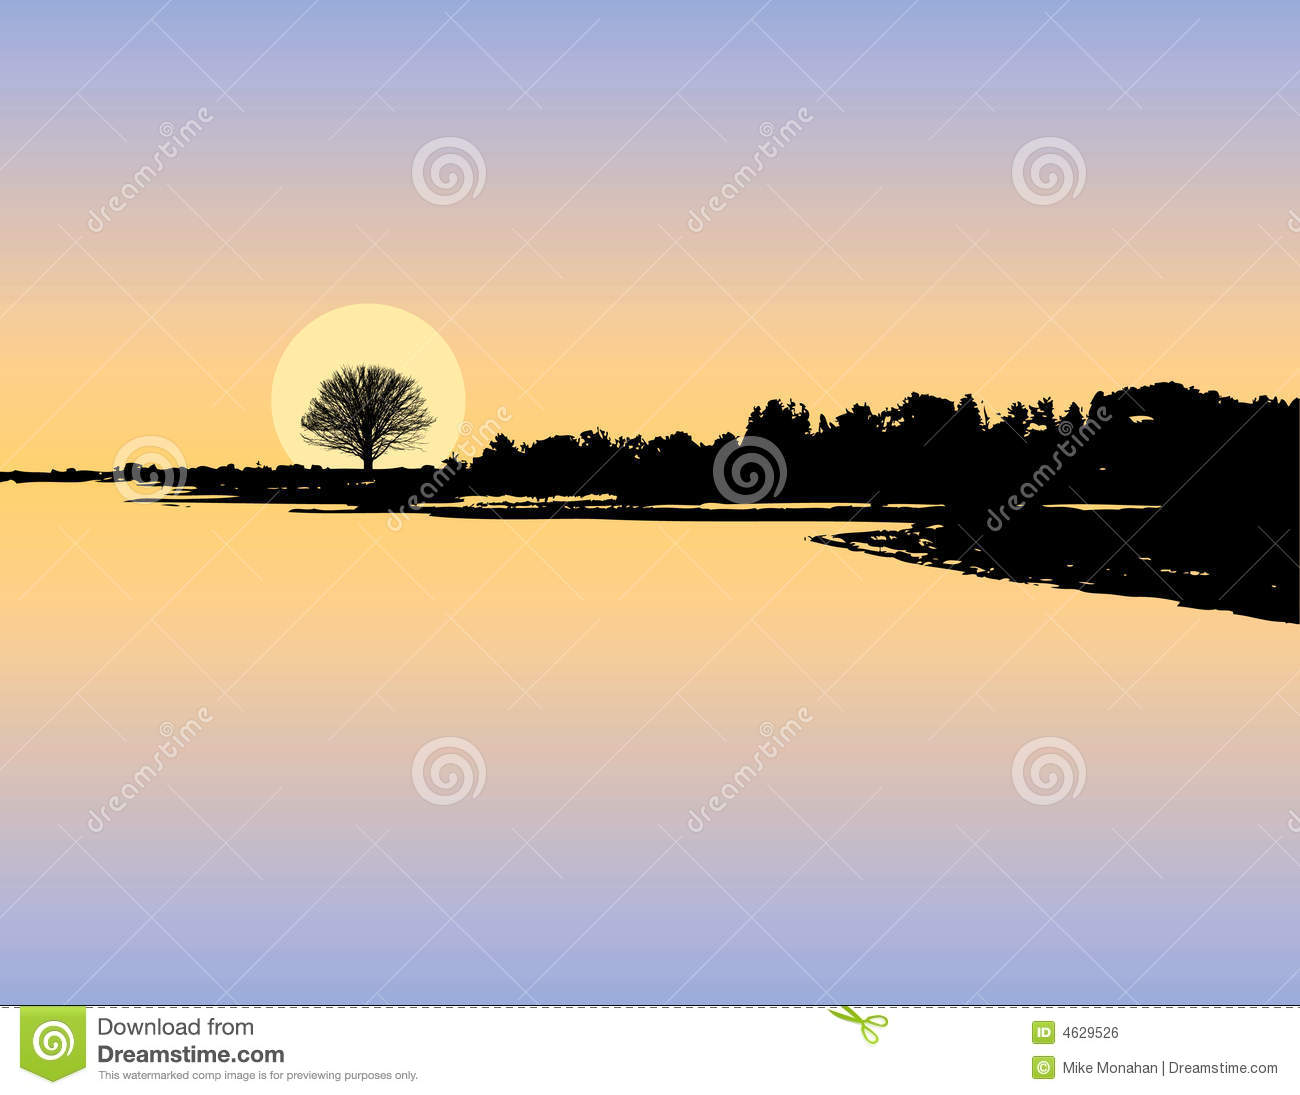 Lake Sunset clipart #15, Download drawings